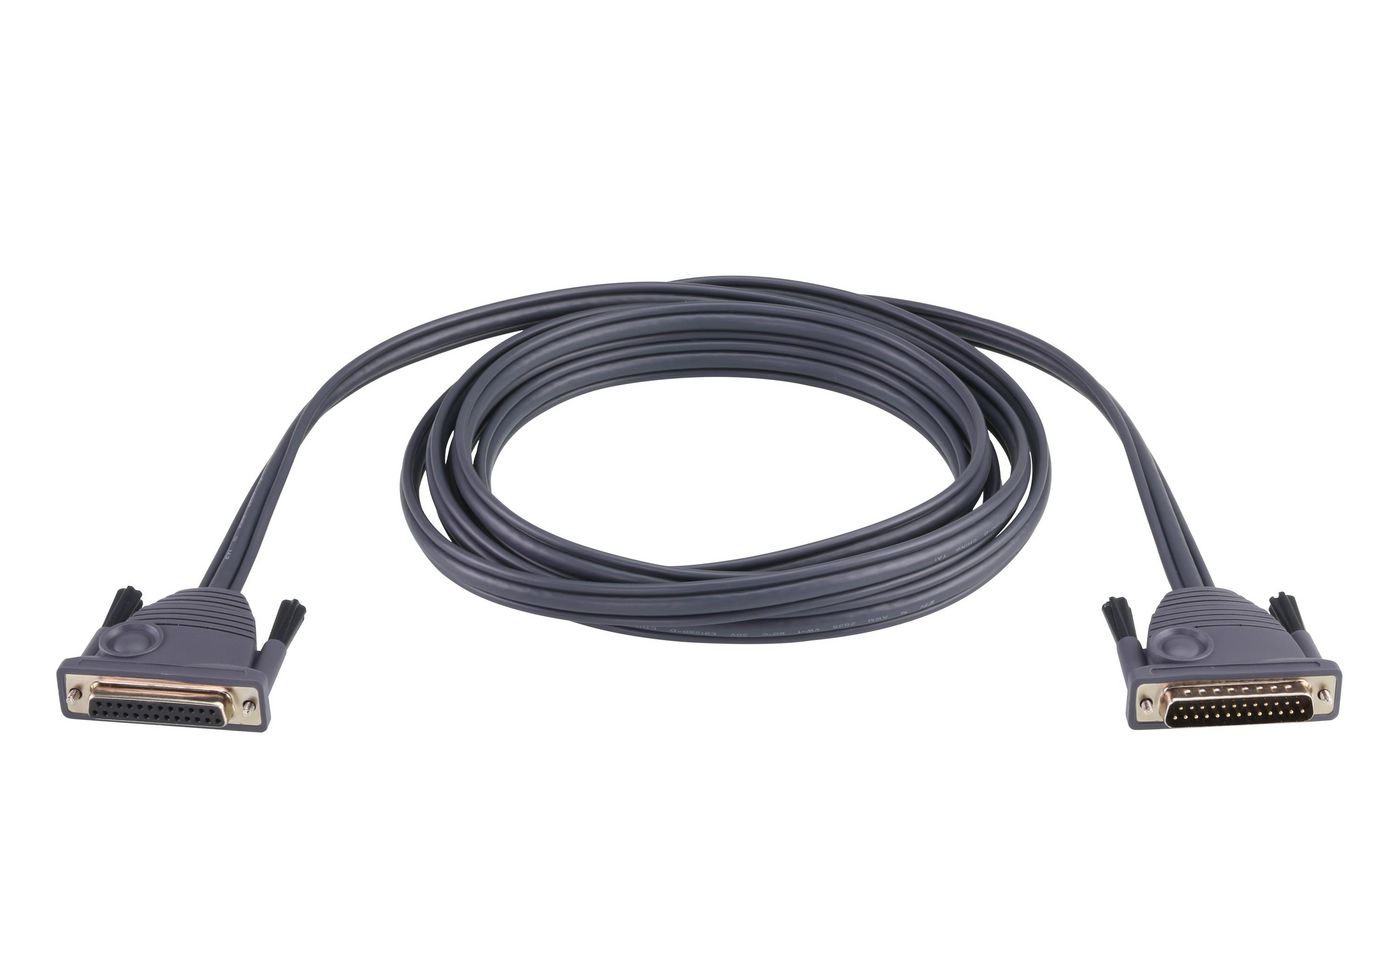 ATEN KVM cable 1.8m Daisy Chain Cable